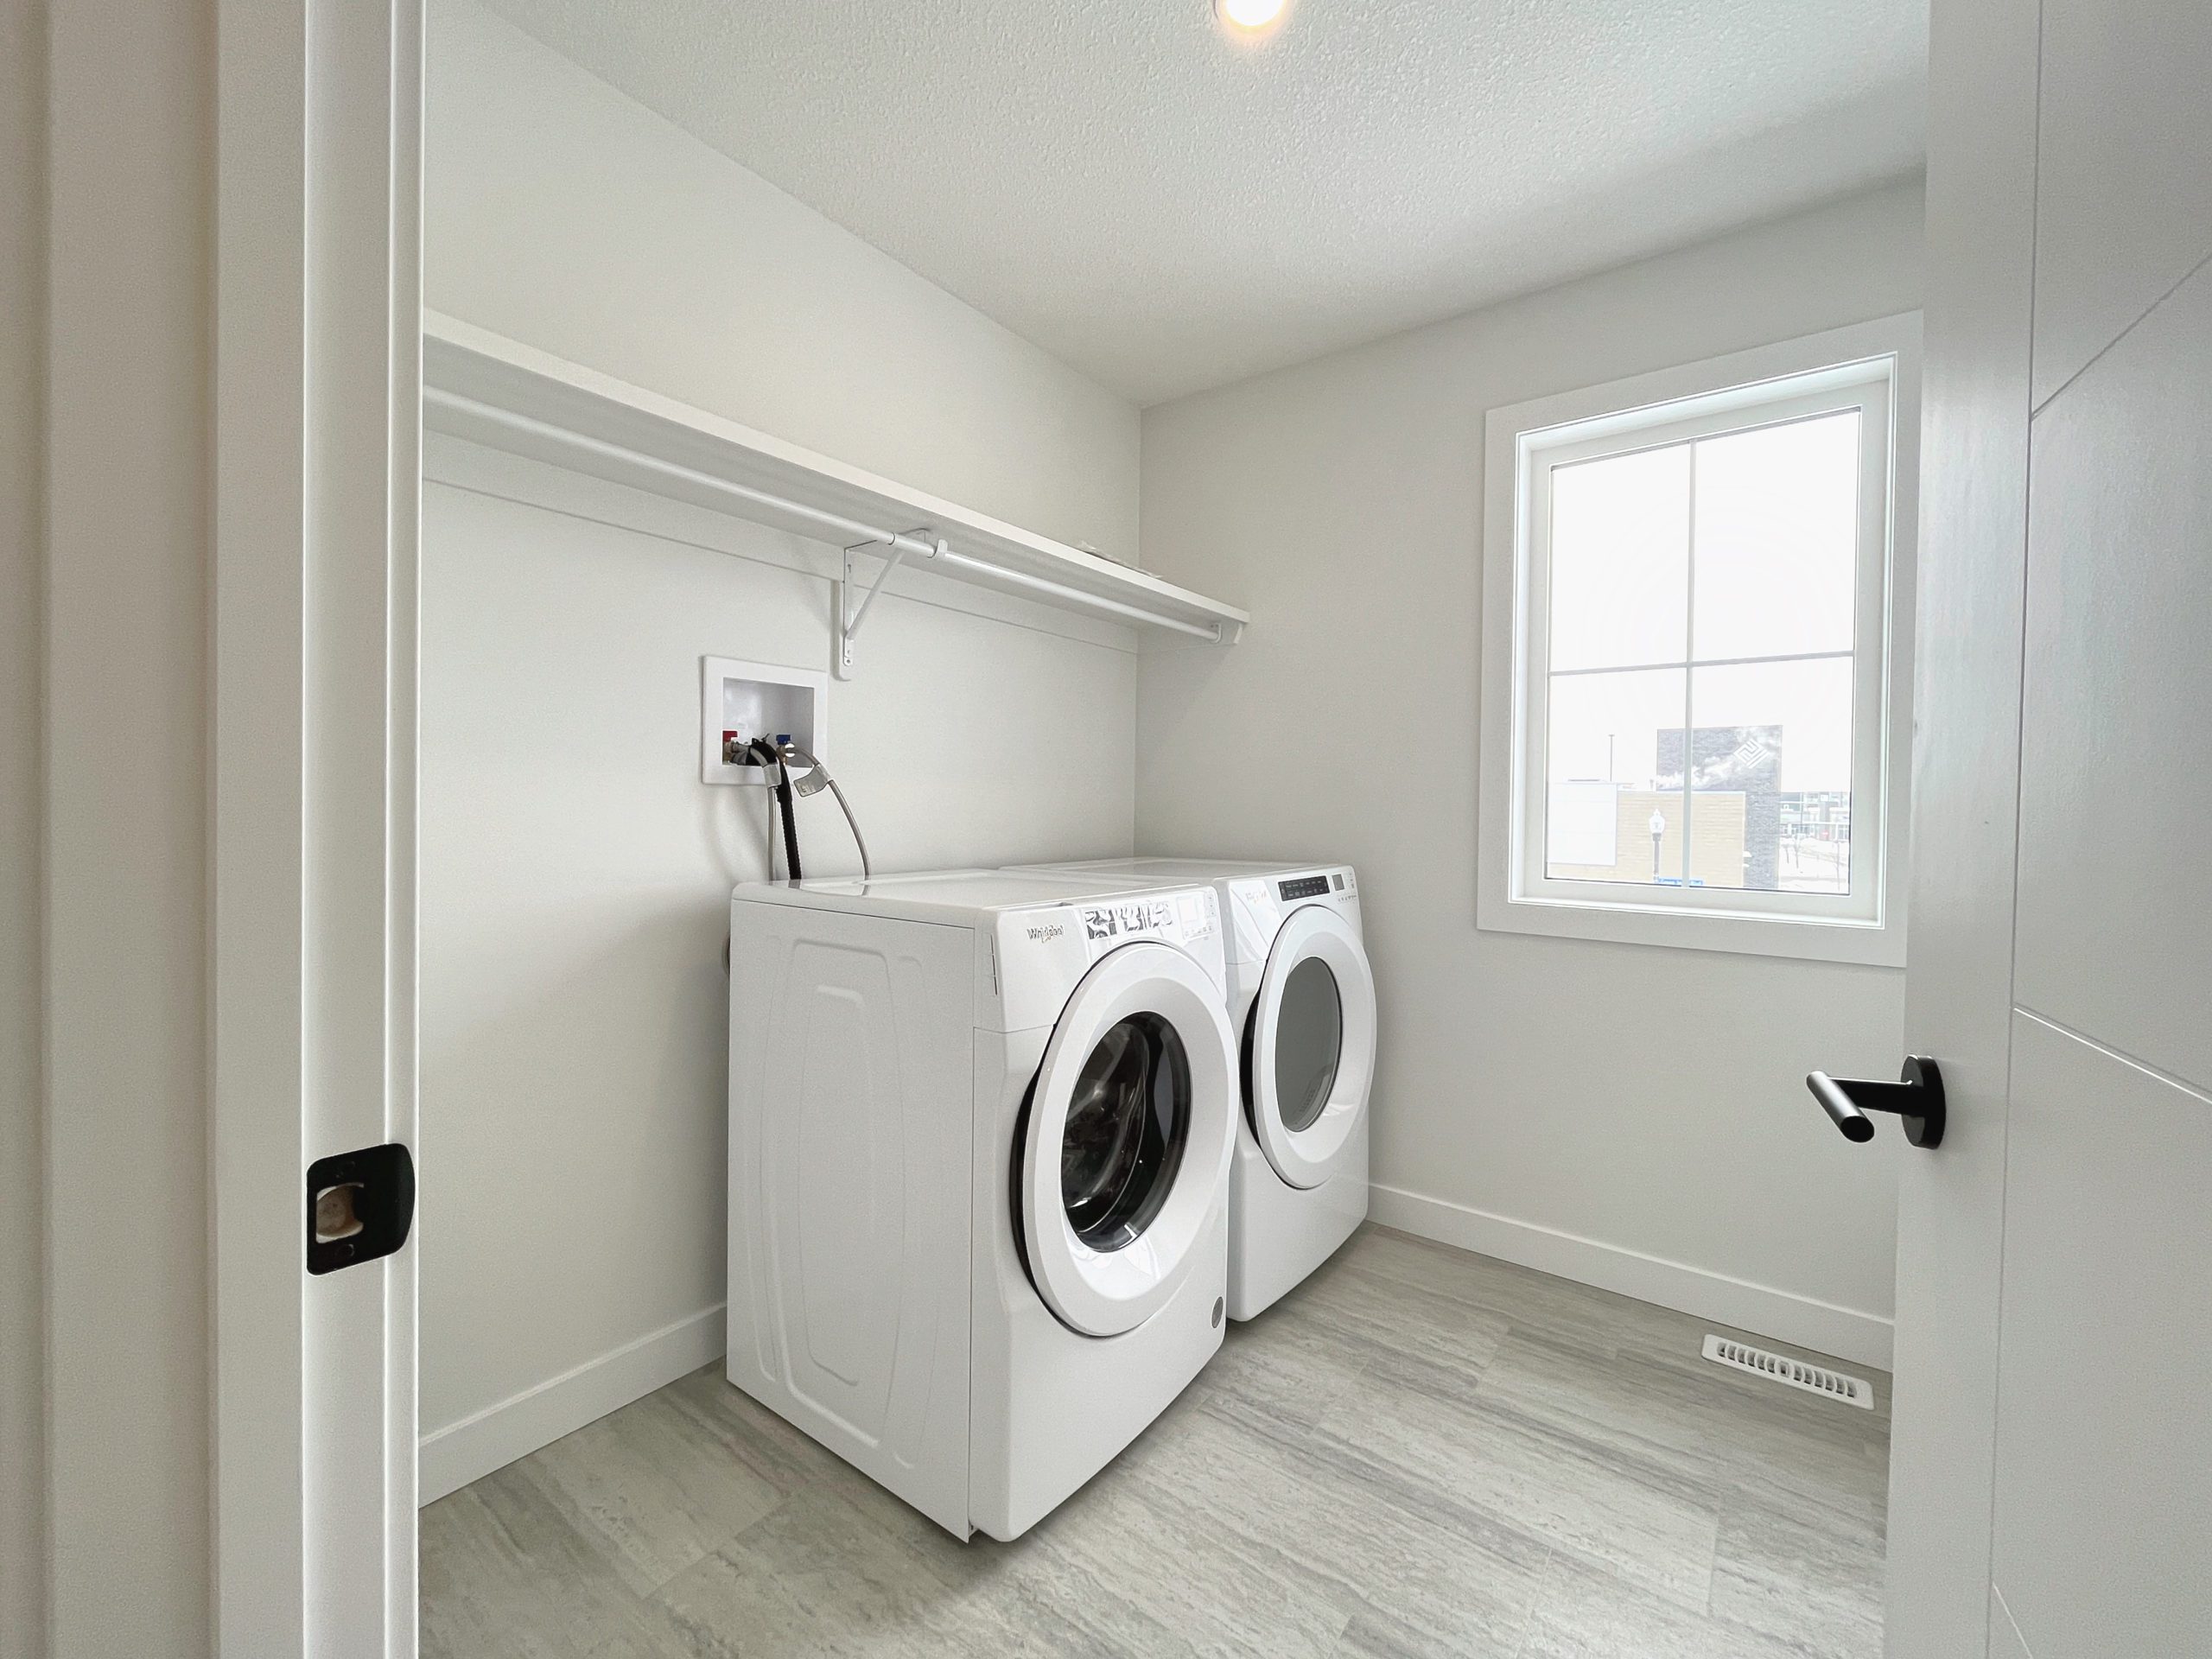 Upstairs laundry room with a washer and dryer.